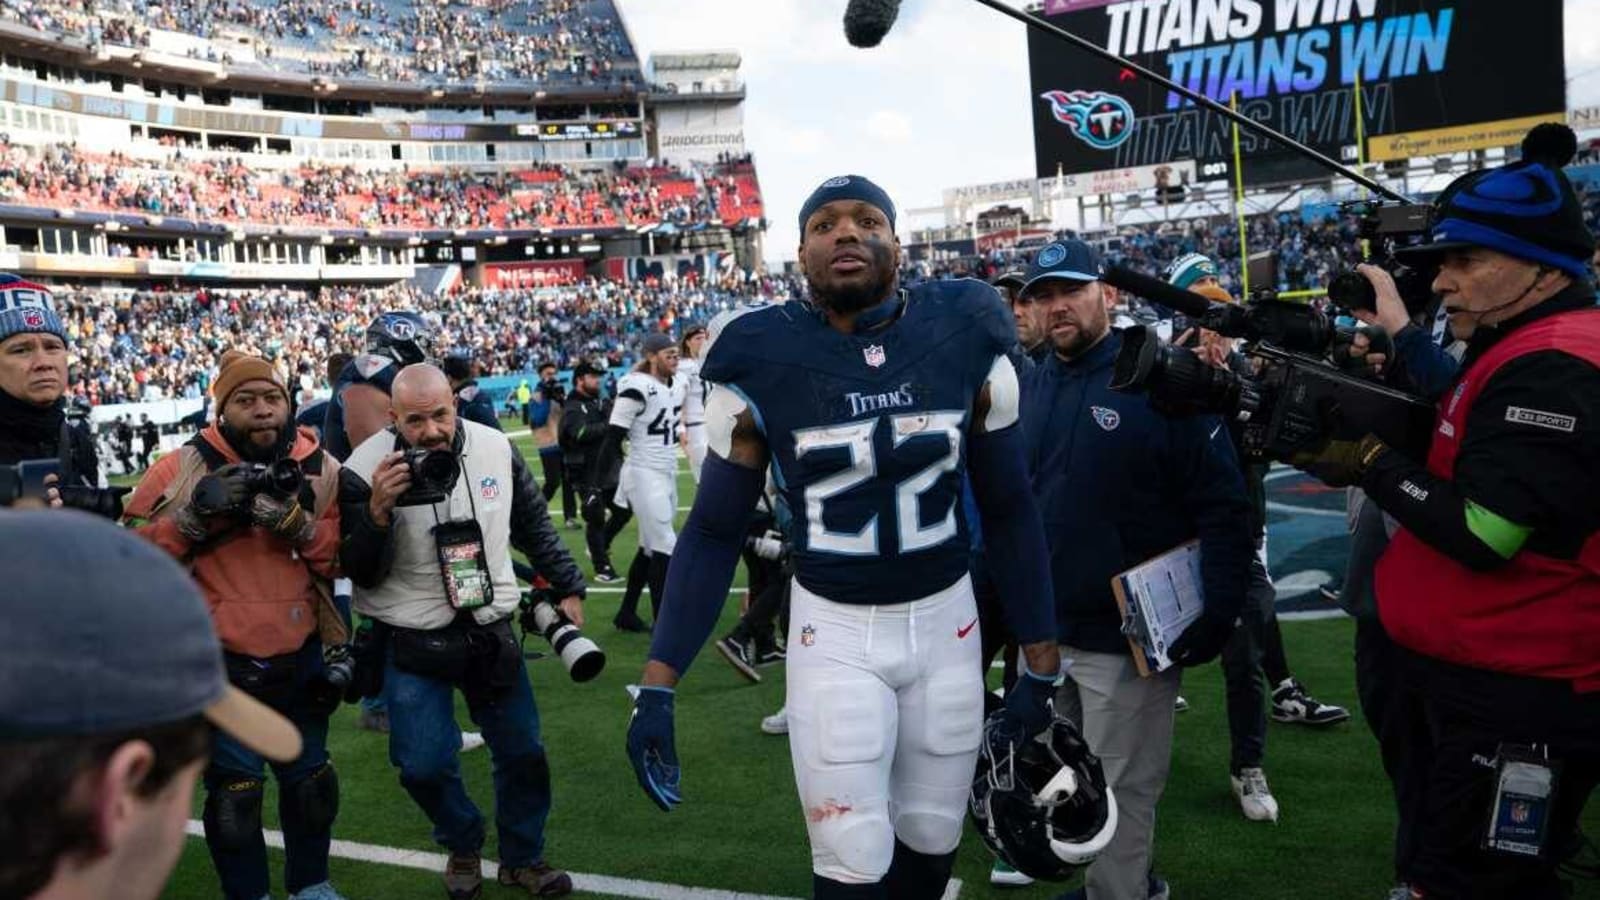 Titans Legend Derrick Henry to debut with Ravens vs Chiefs in NFL Season Opener